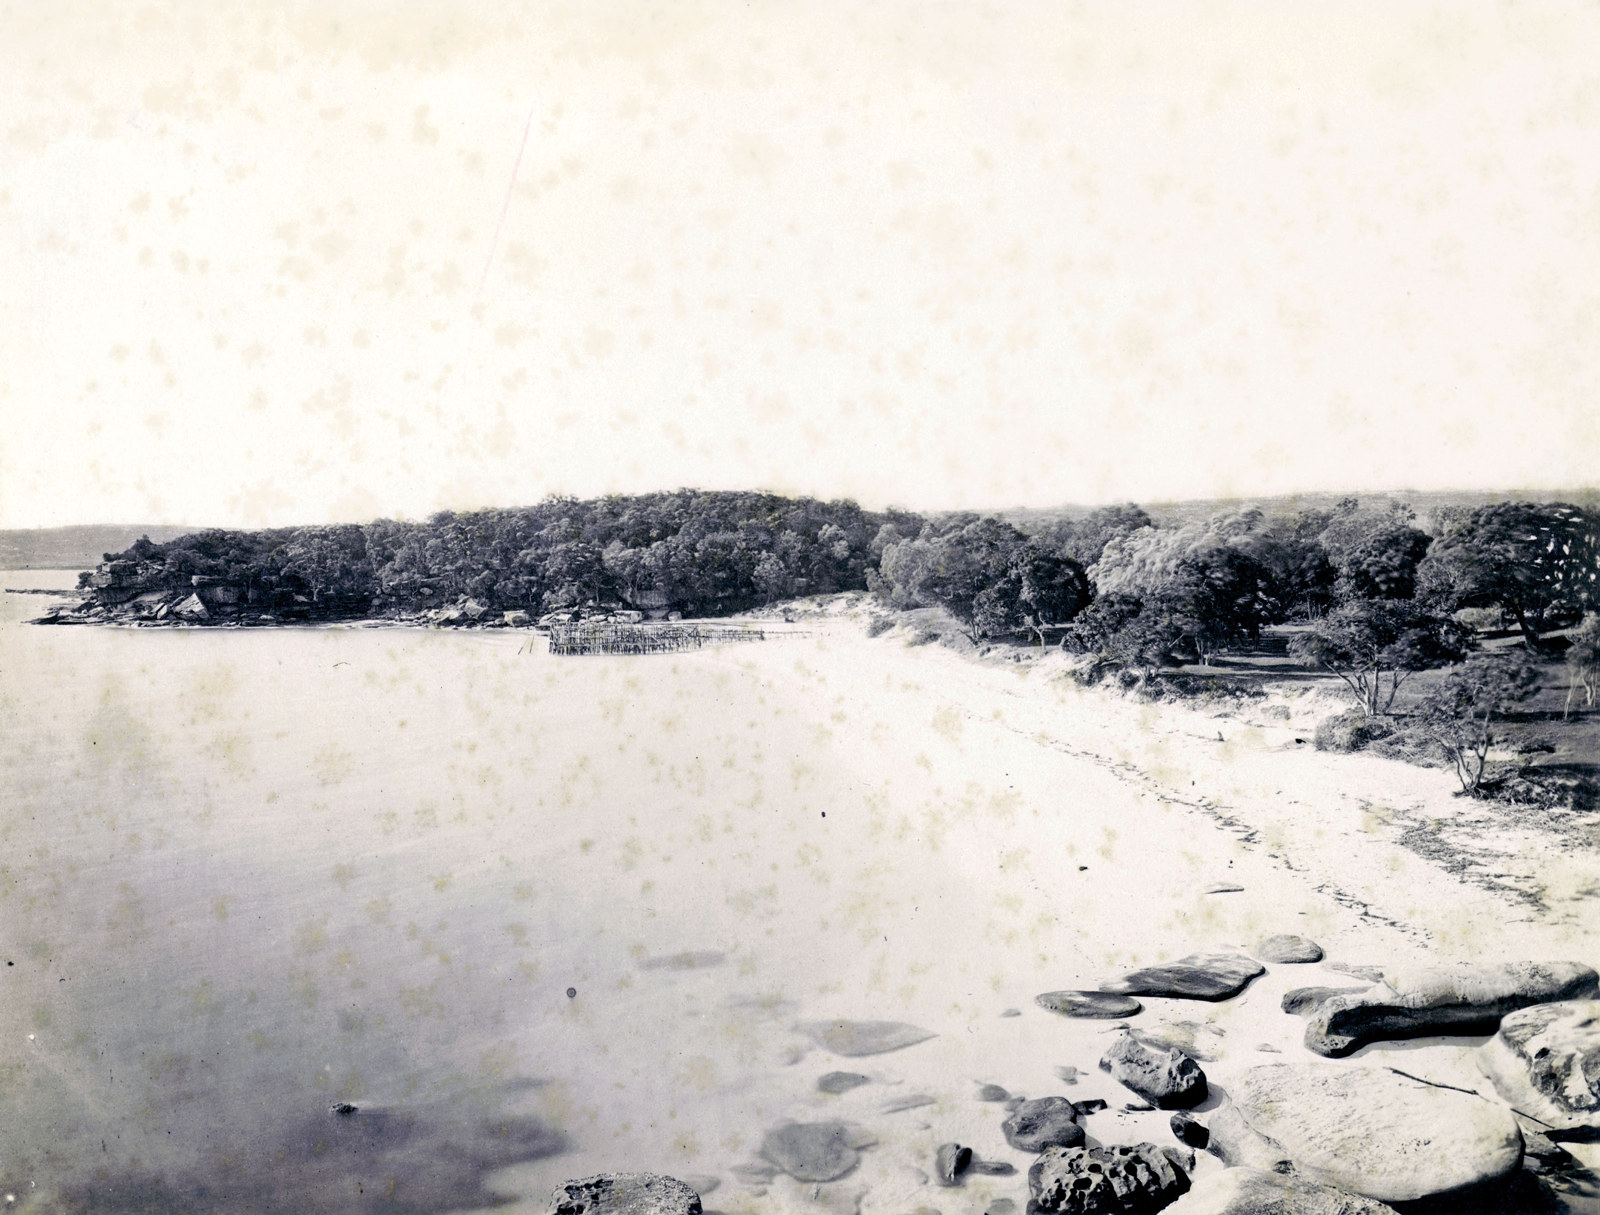 B/W photo showing a beach-lined bay with rocks and some kind of makeshift swimming enclosure at the water's edge.